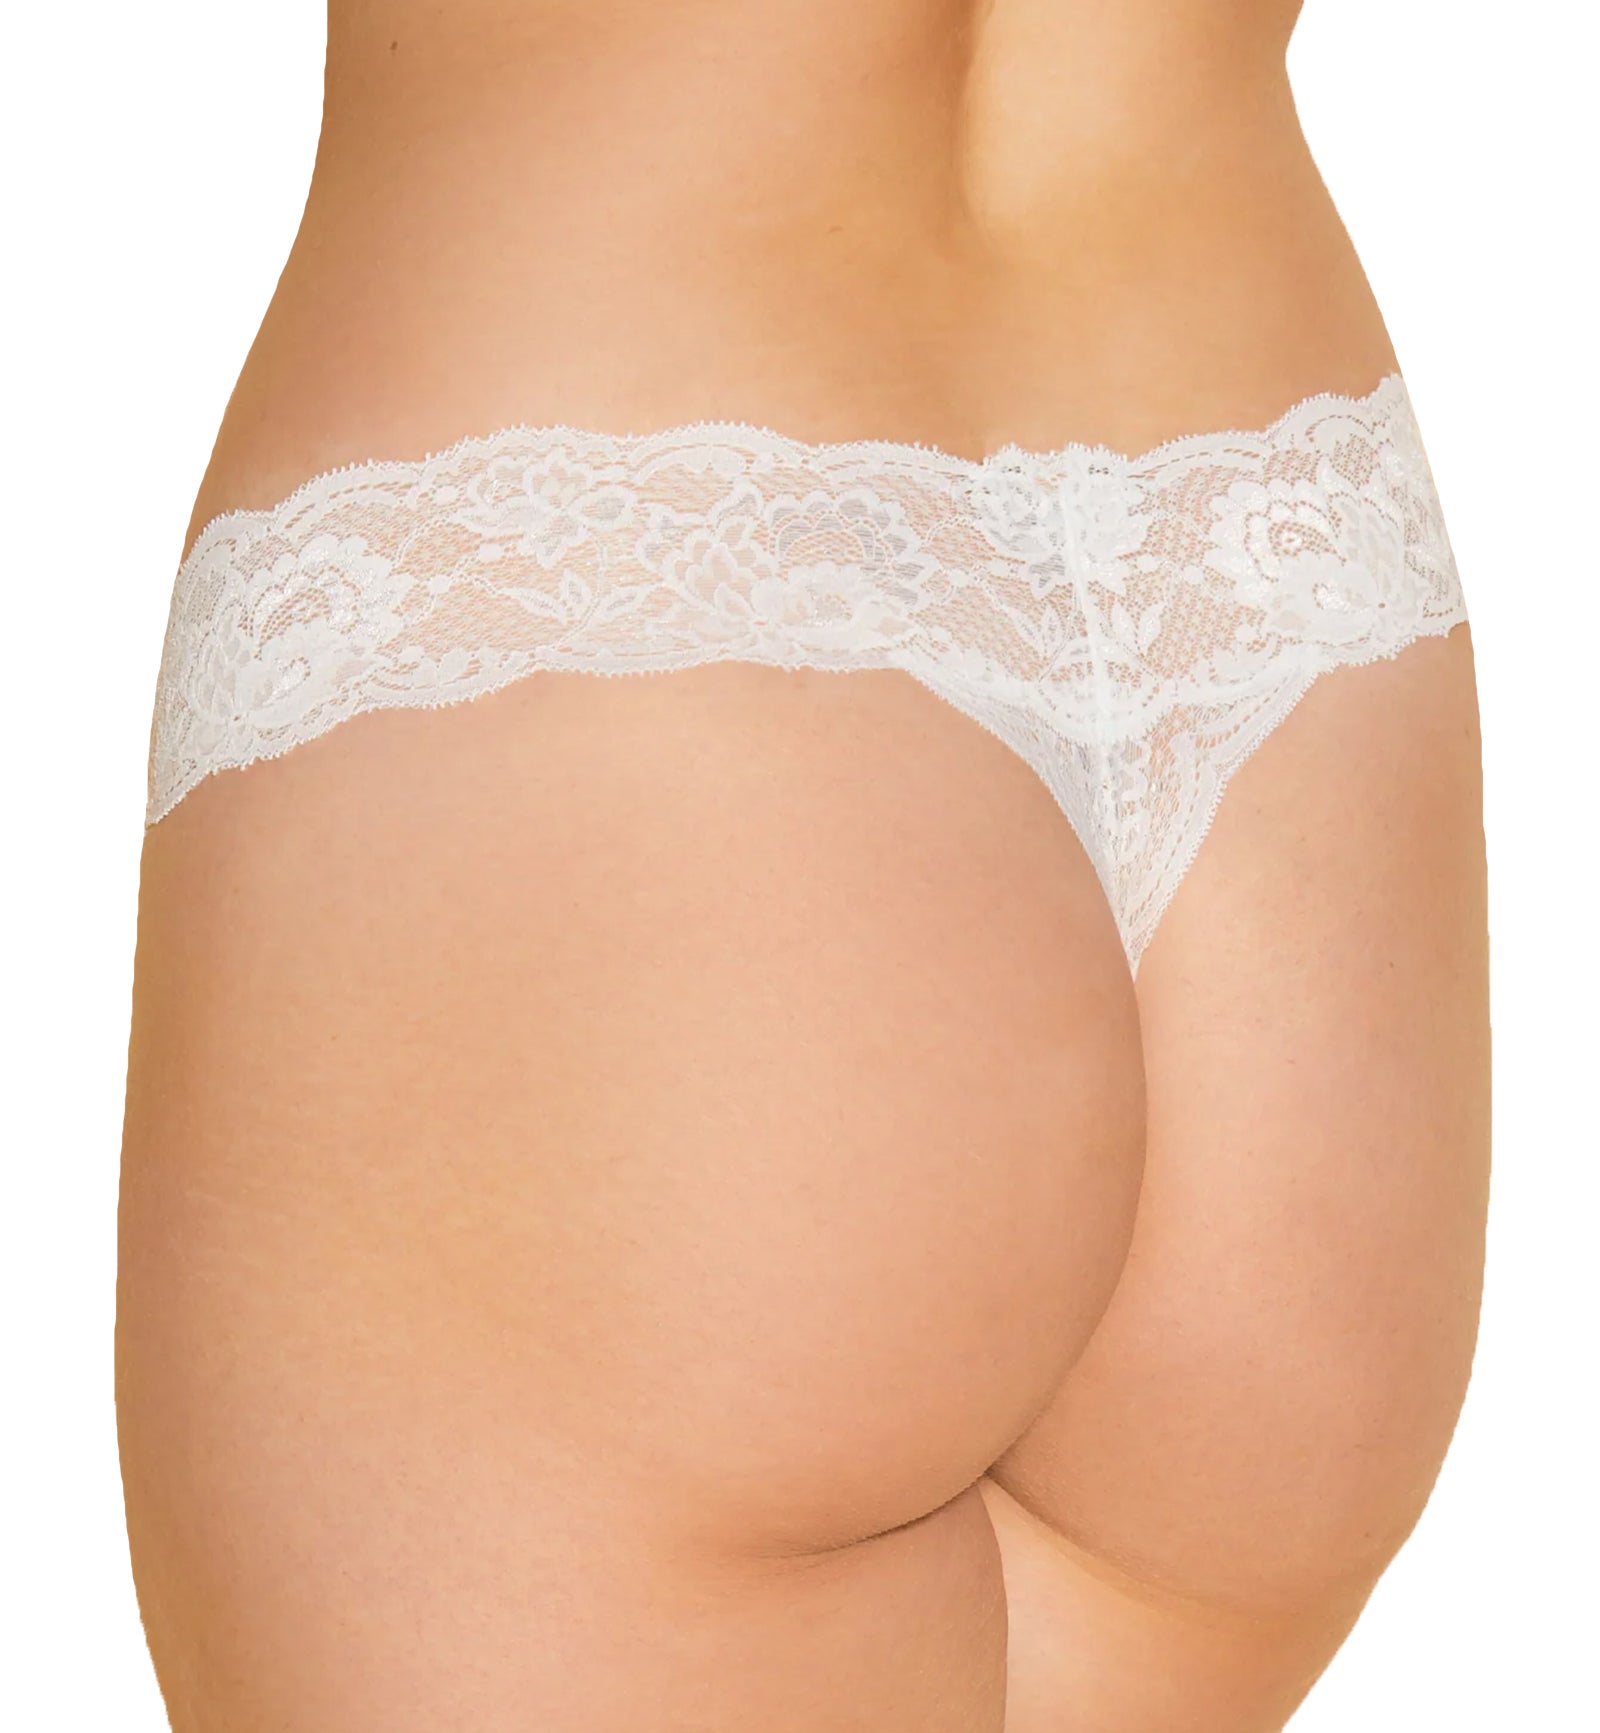 Cosabella Never Say Never Cutie Lowrider Thong (NEVER03ZL),White - White,One Size